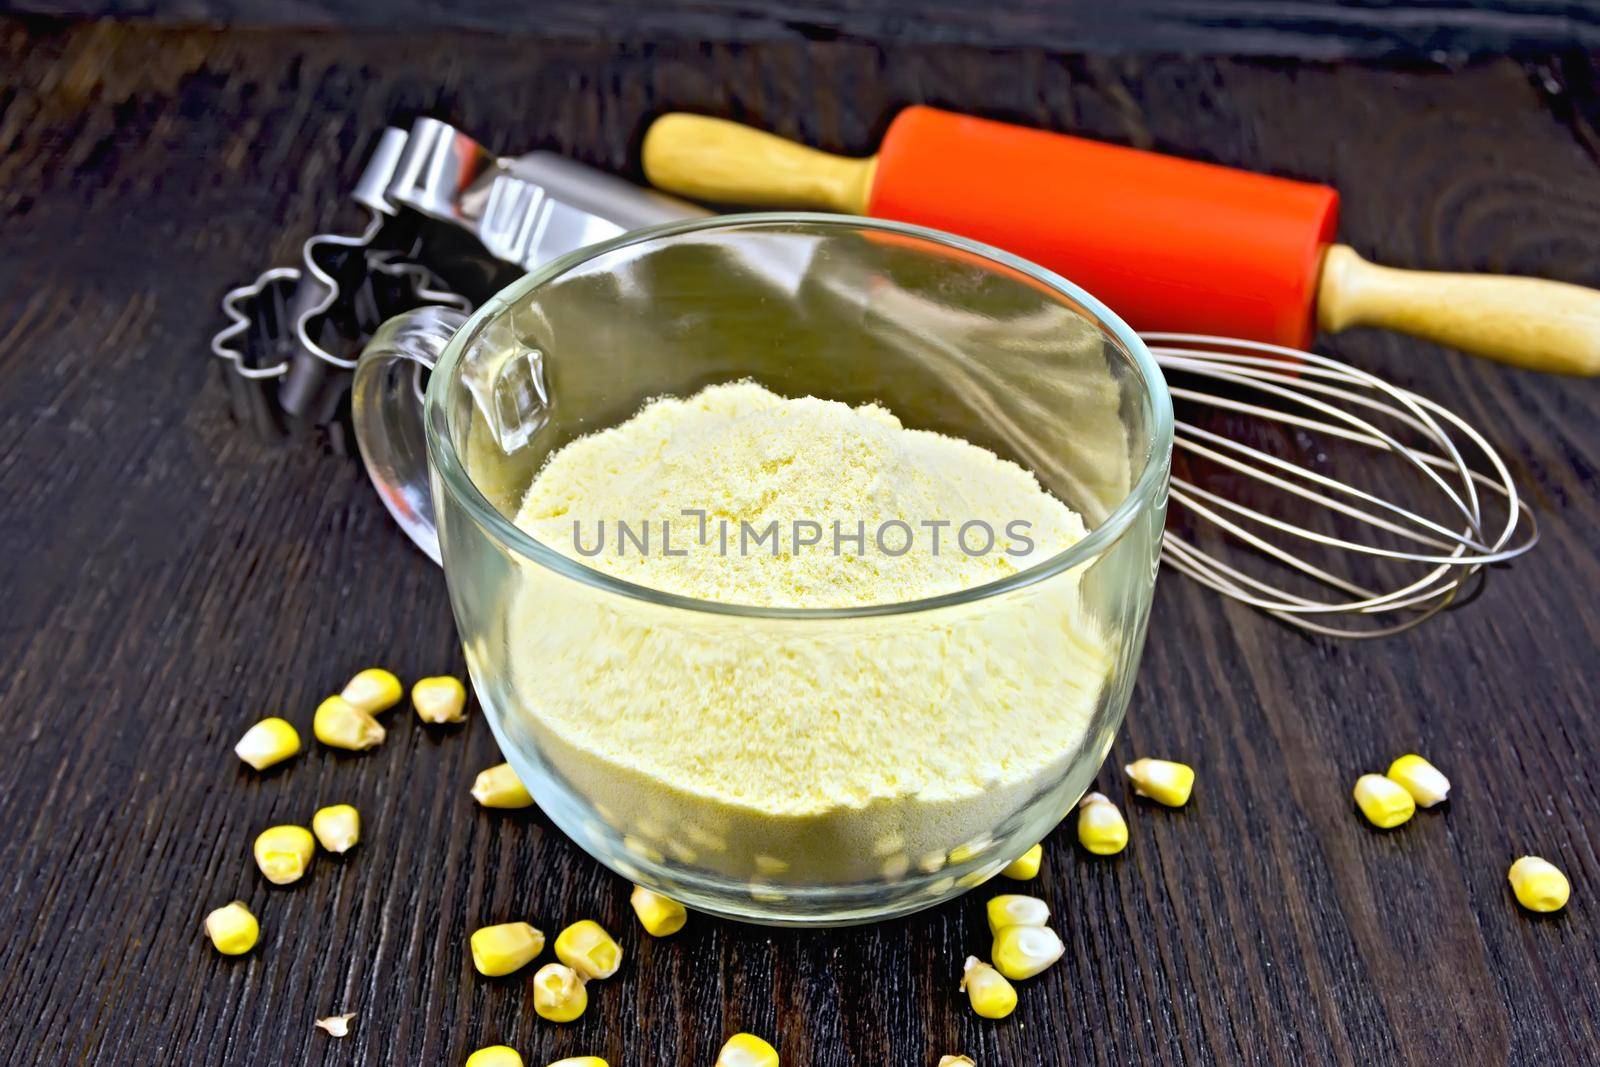 Flour corn in cup, grain, rolling pin and metal cookie cutters on a wooden board